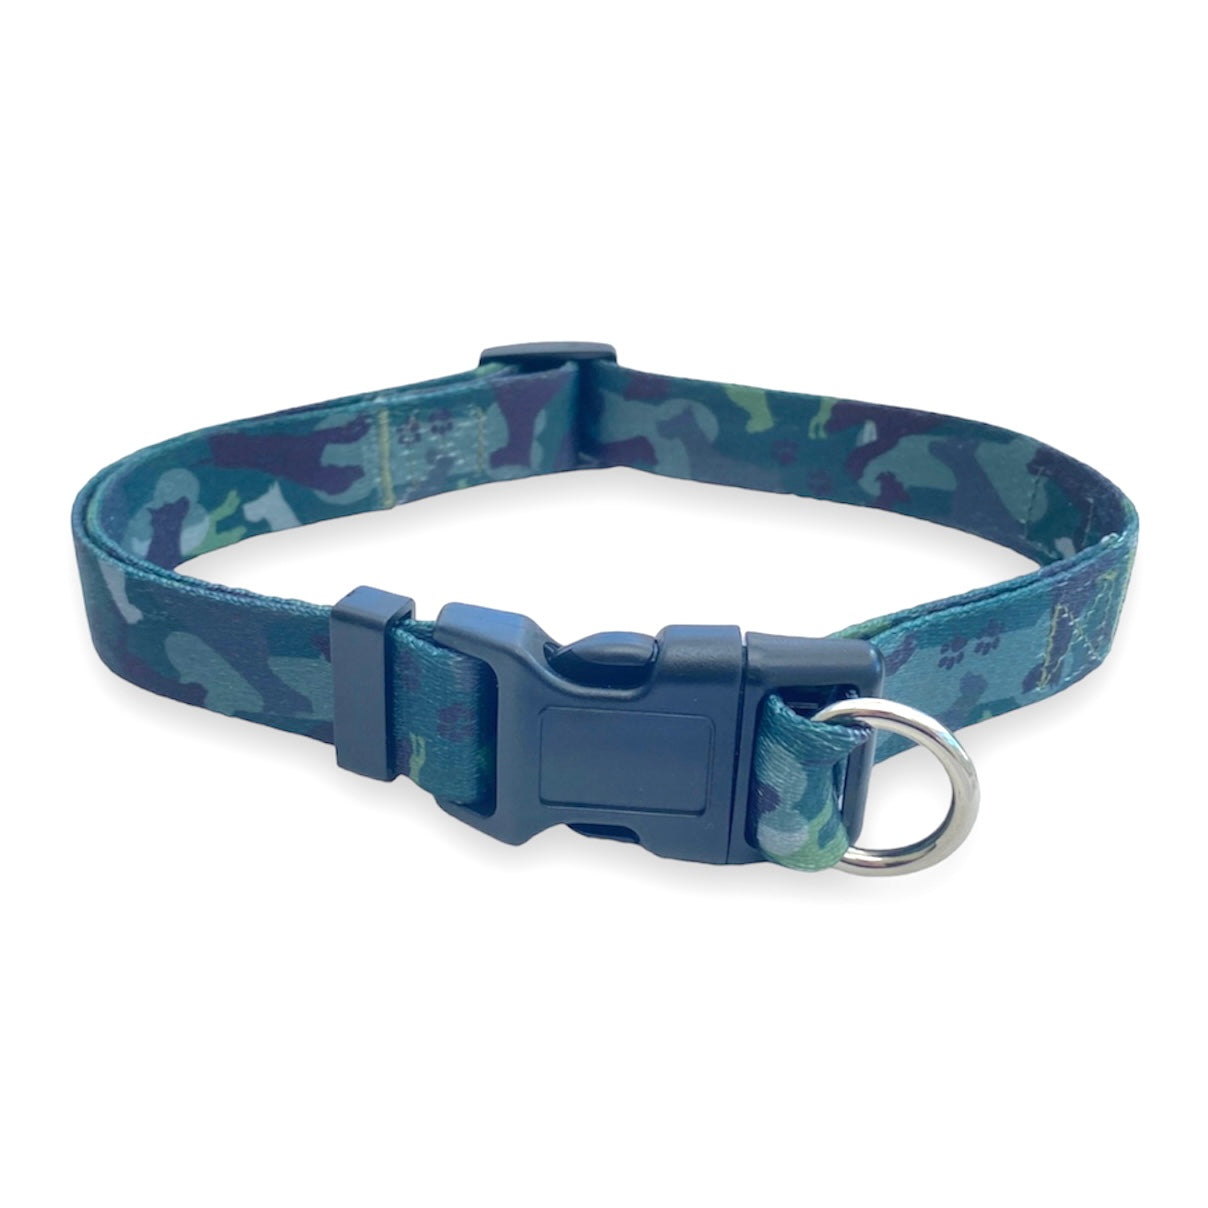 a photo of a green camouflage escape proof safe cinch dog collar by fearless pet